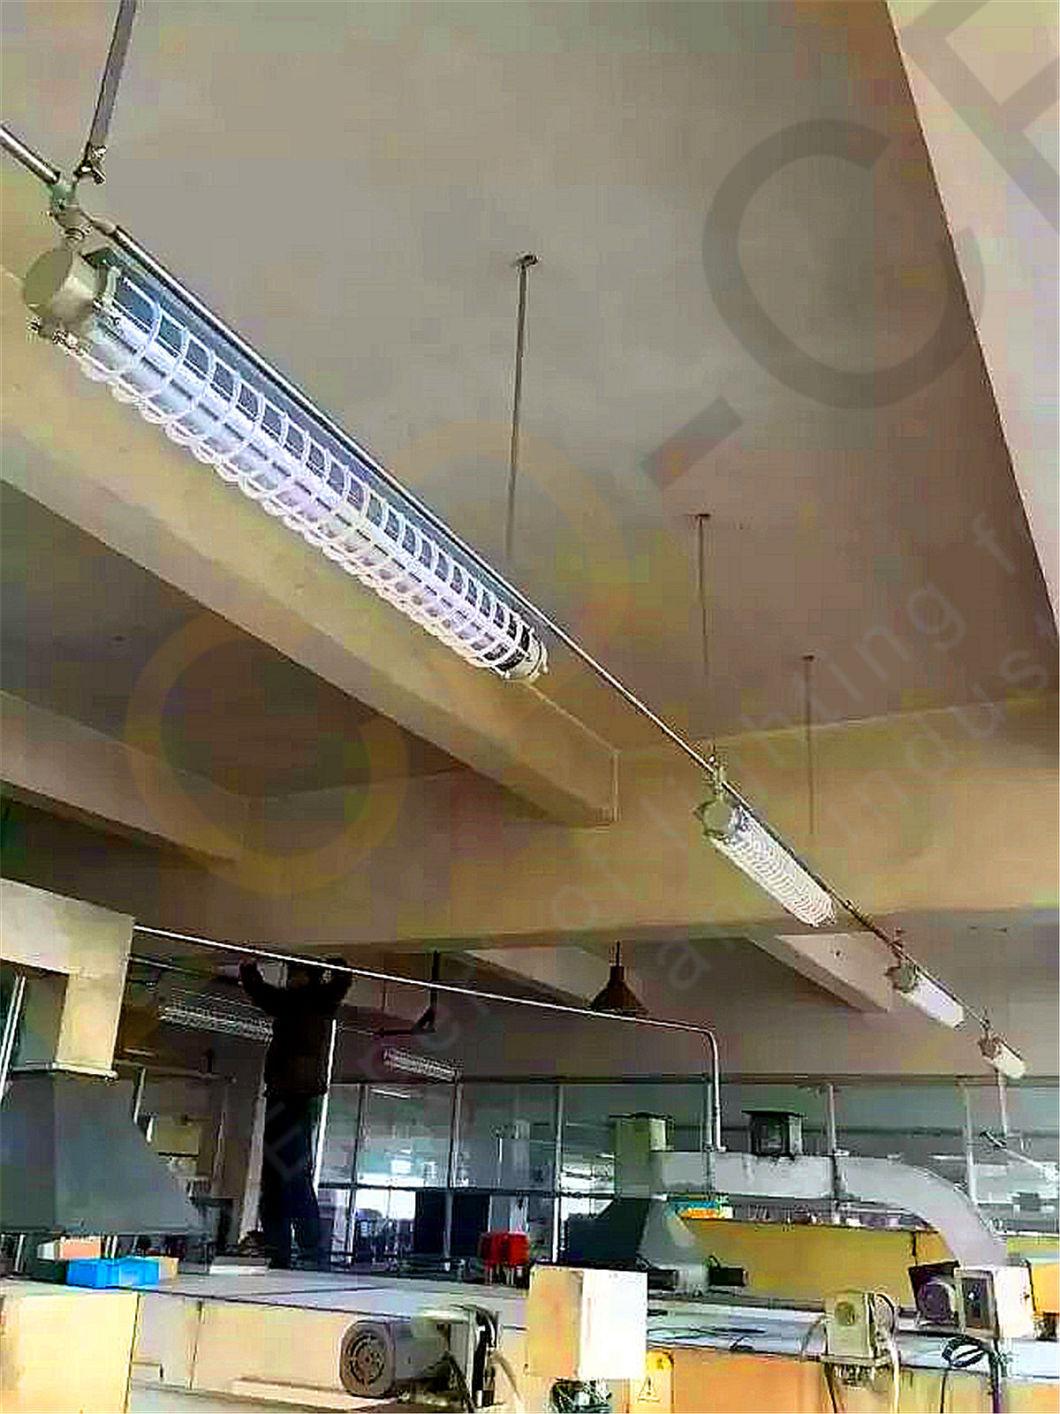 Explosion-Proof Dust-Proof Best Control UV Light 2feet 4feet 5feet LED Fluorescent Light Iecex Certificate of Conformity IP65 and 5 Years Warranty